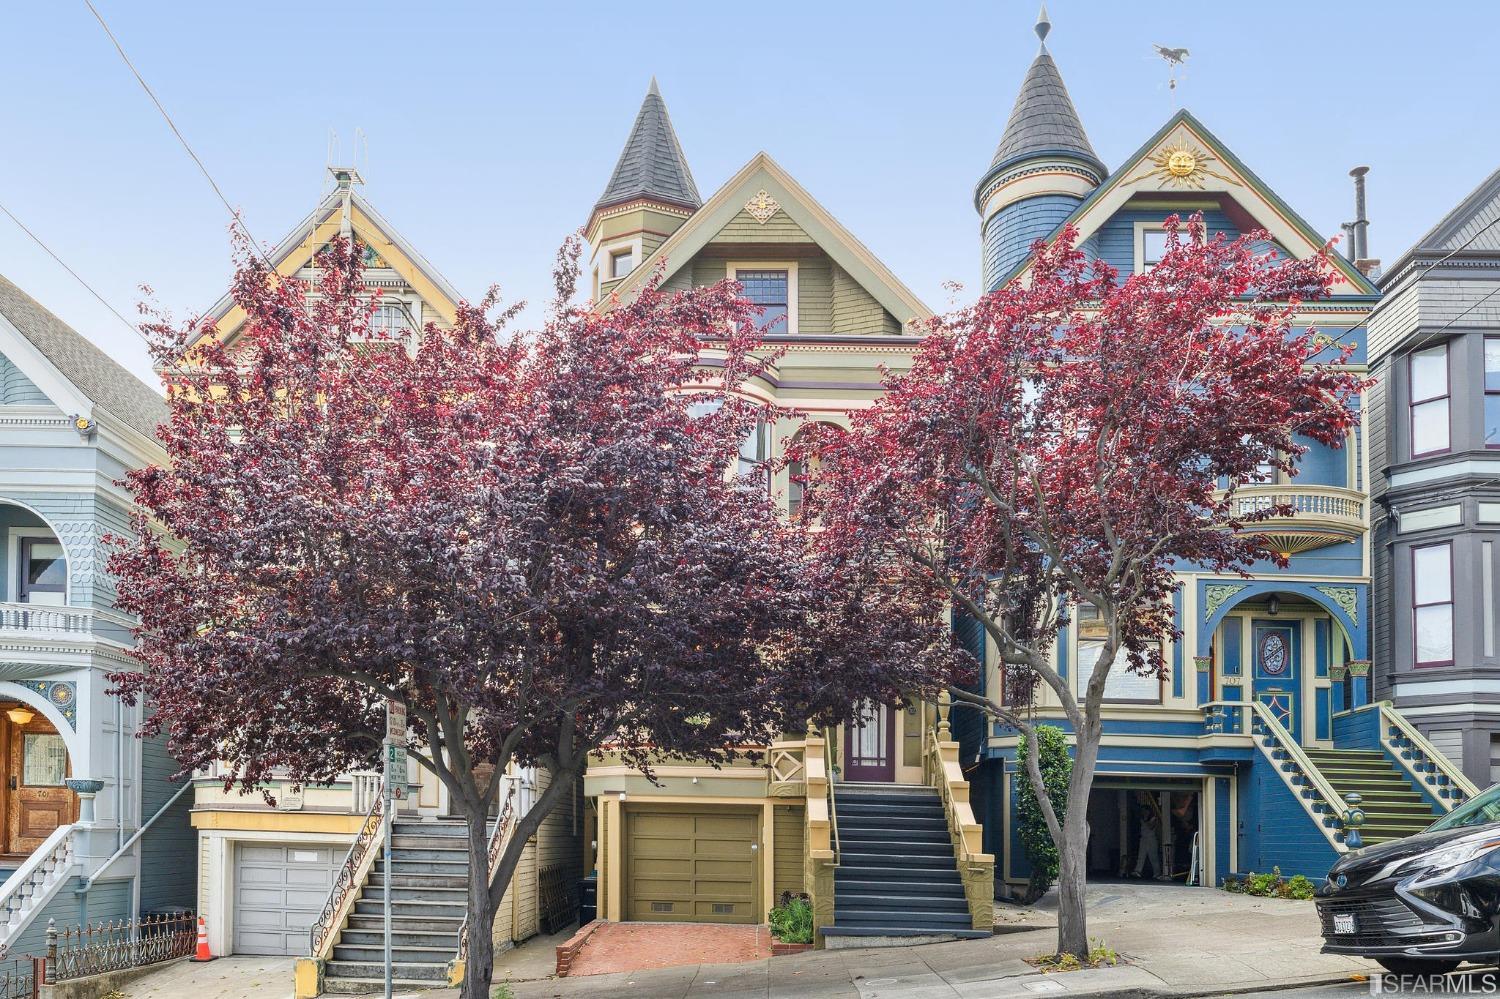 Experience the vibrancy of living in an exquisite Queen Anne Victorian on NOPA's treasured Broderick Row! 4 lvls of stunning Victorian details pair w/ an impeccable remodel, separate studio unit on ground lvl, a walk-out yard & blue-sky views.Cranston & Keenan's 1892 design has been meticulously redesigned throughout w/ a designer's touch. A breathtaking experience from the moment you enter; a sprawling triple parlor is showcased by towering Victorian ceilings. The home's stunning elaborate exterior details are perfectly matched by its elaborate interior trimmings.Published inMay 2016 House Beautiful, the kitchenfeatures abundant inlaid cabinetry, a farm + task sink & new fixtures thoughtfully chosen to blend w/ the home's period details. All baths, including the home's primary suite, are simply top-notch; recently remodeled w/ consistent finishes, clad / gleaming floor-to-ceiling tile, awesome lighting, walk-in glass shower enclosures & marble accents.All practicalities in place; sunroom makes for an ideal home office, abundant built-ins & closets + W/D in a large utility area. On ground lvl you'll find a charming separate studio unit w/ its own separate entrance from Broderick St. & direct access to the home's yard, a spacious1-car grg w/ internal access & car charger.